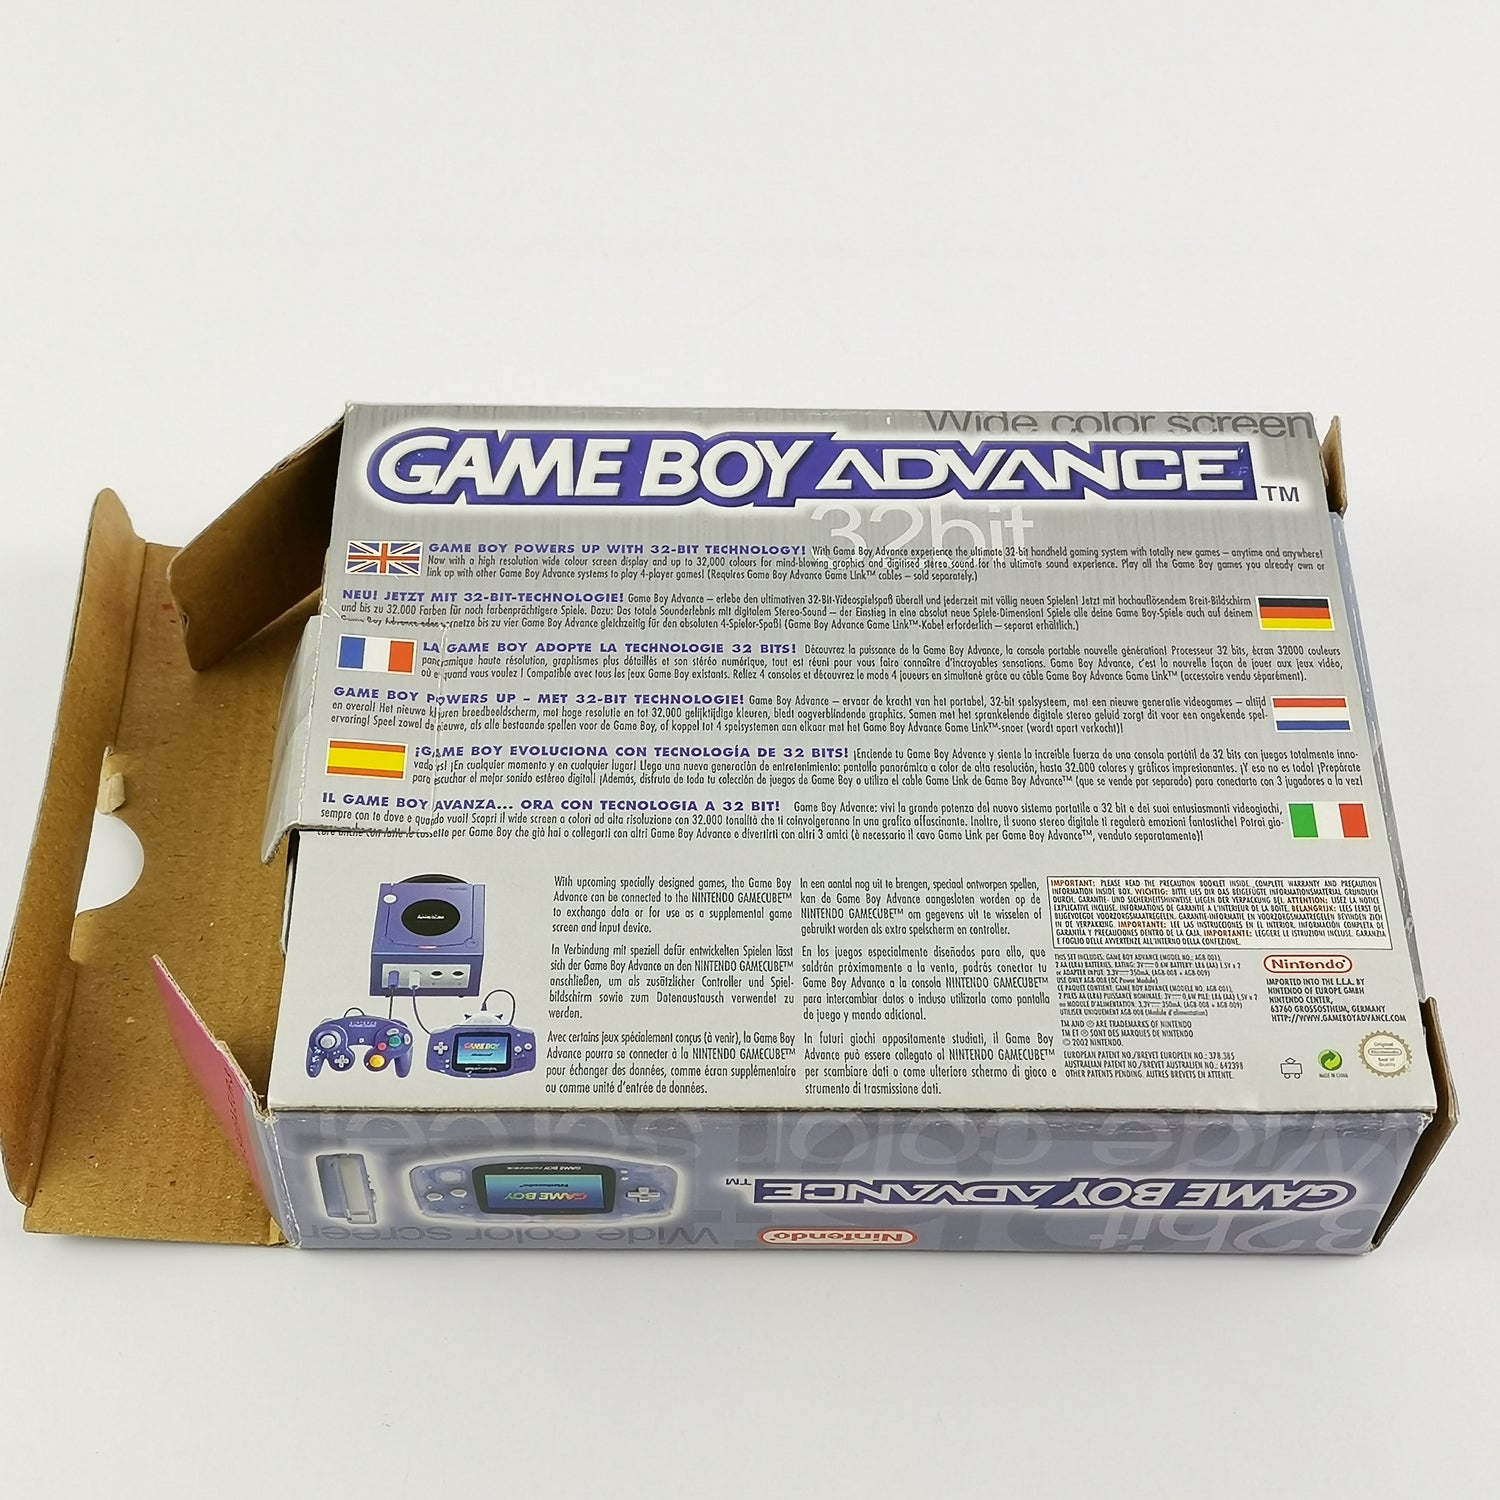 Nintendo Game Boy Advance Konsole - Transparent in OVP GBA Console PAL